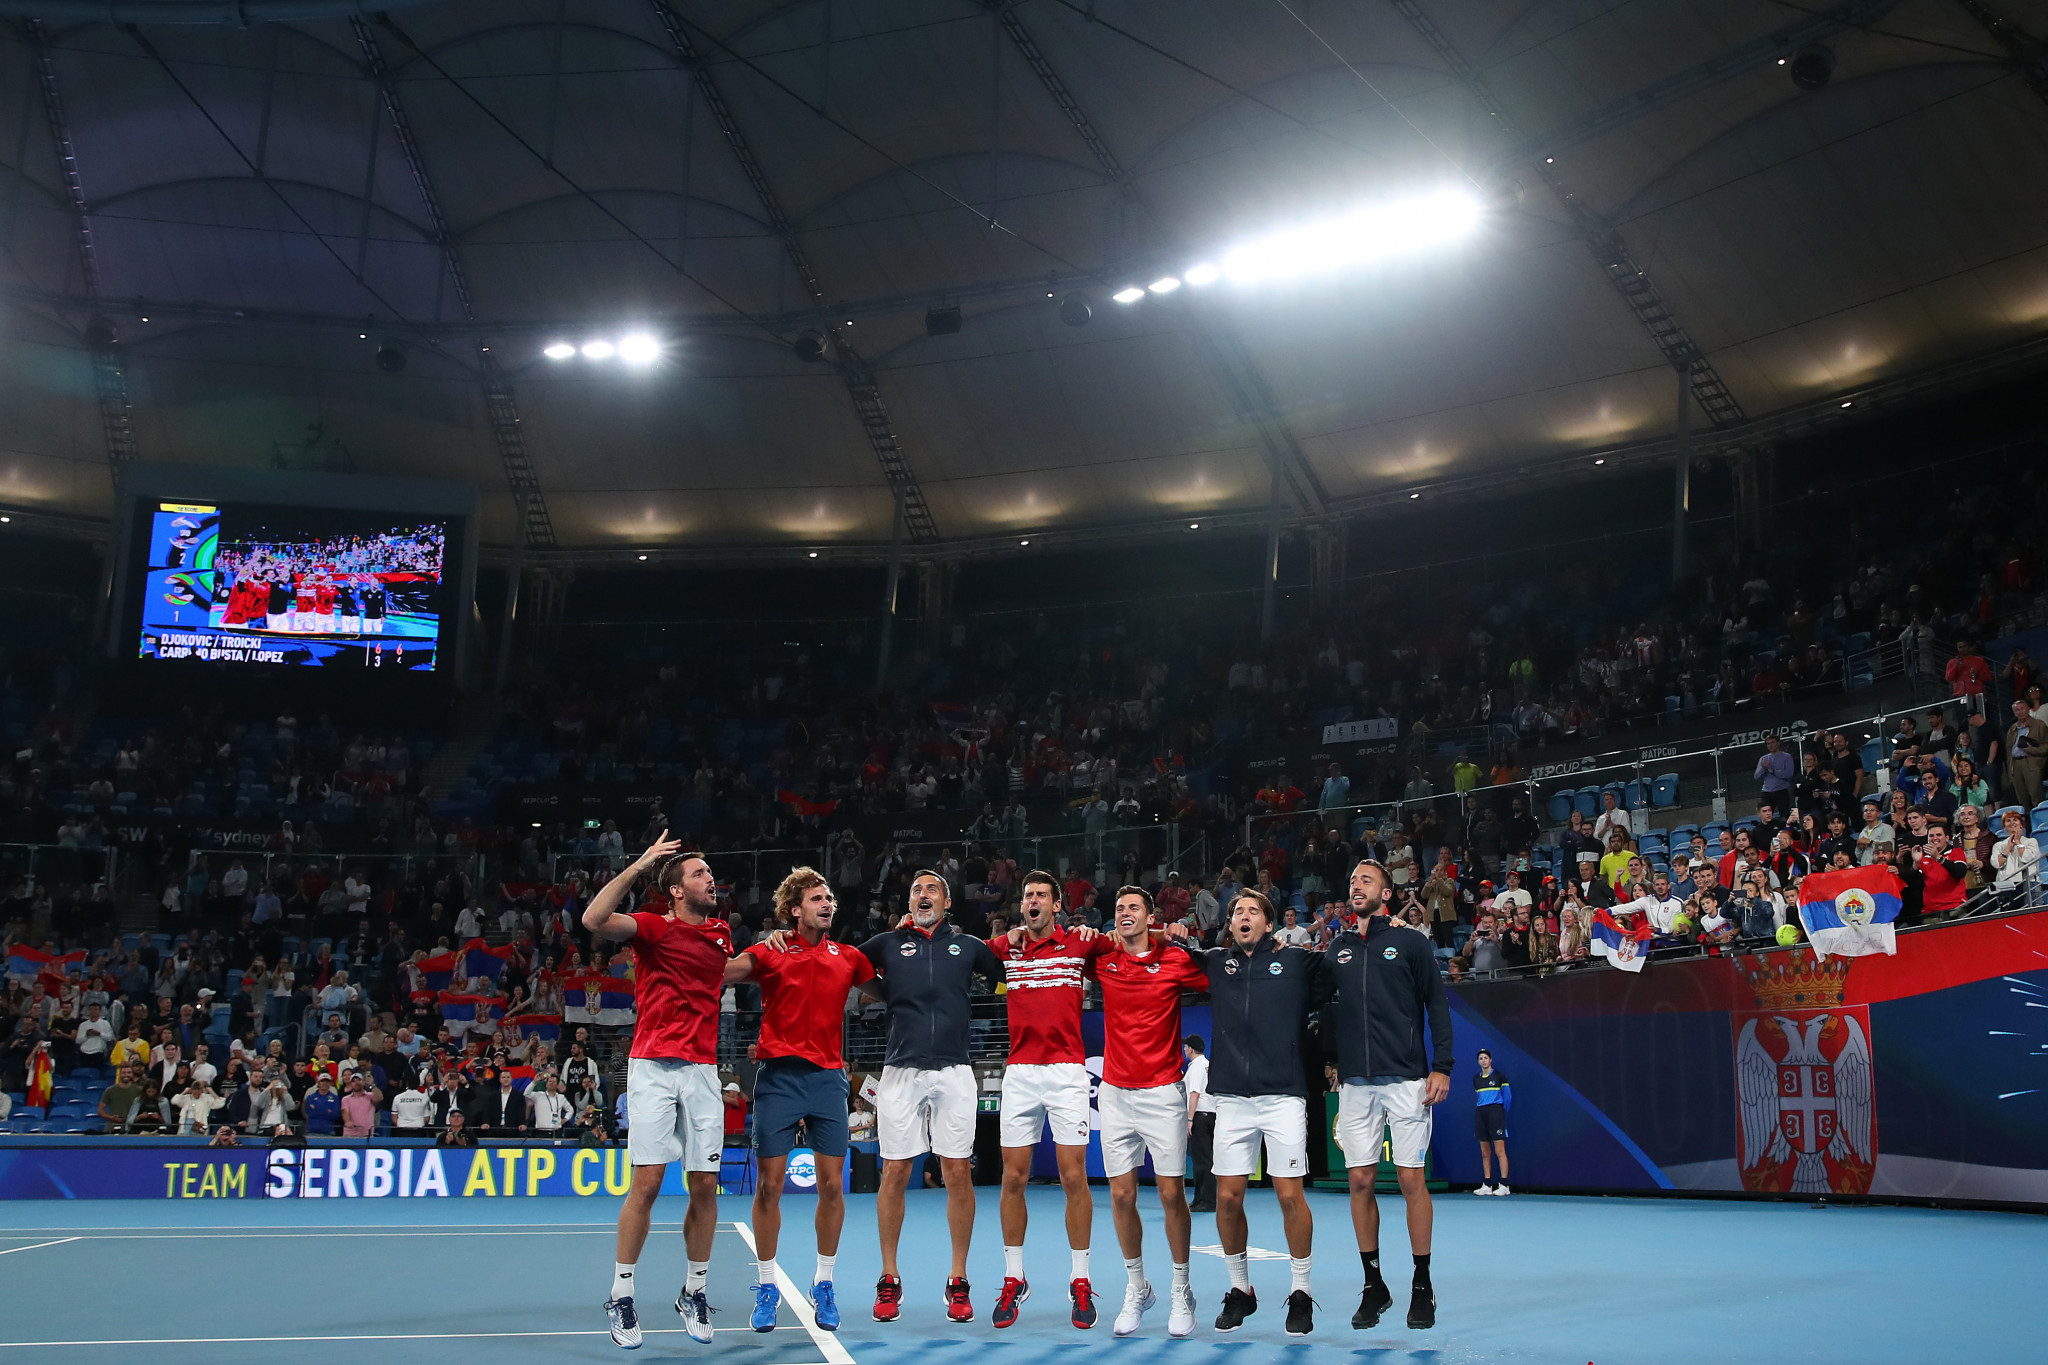 Serbia won the decisive doubles rubber to win the tournament ©Getty Images